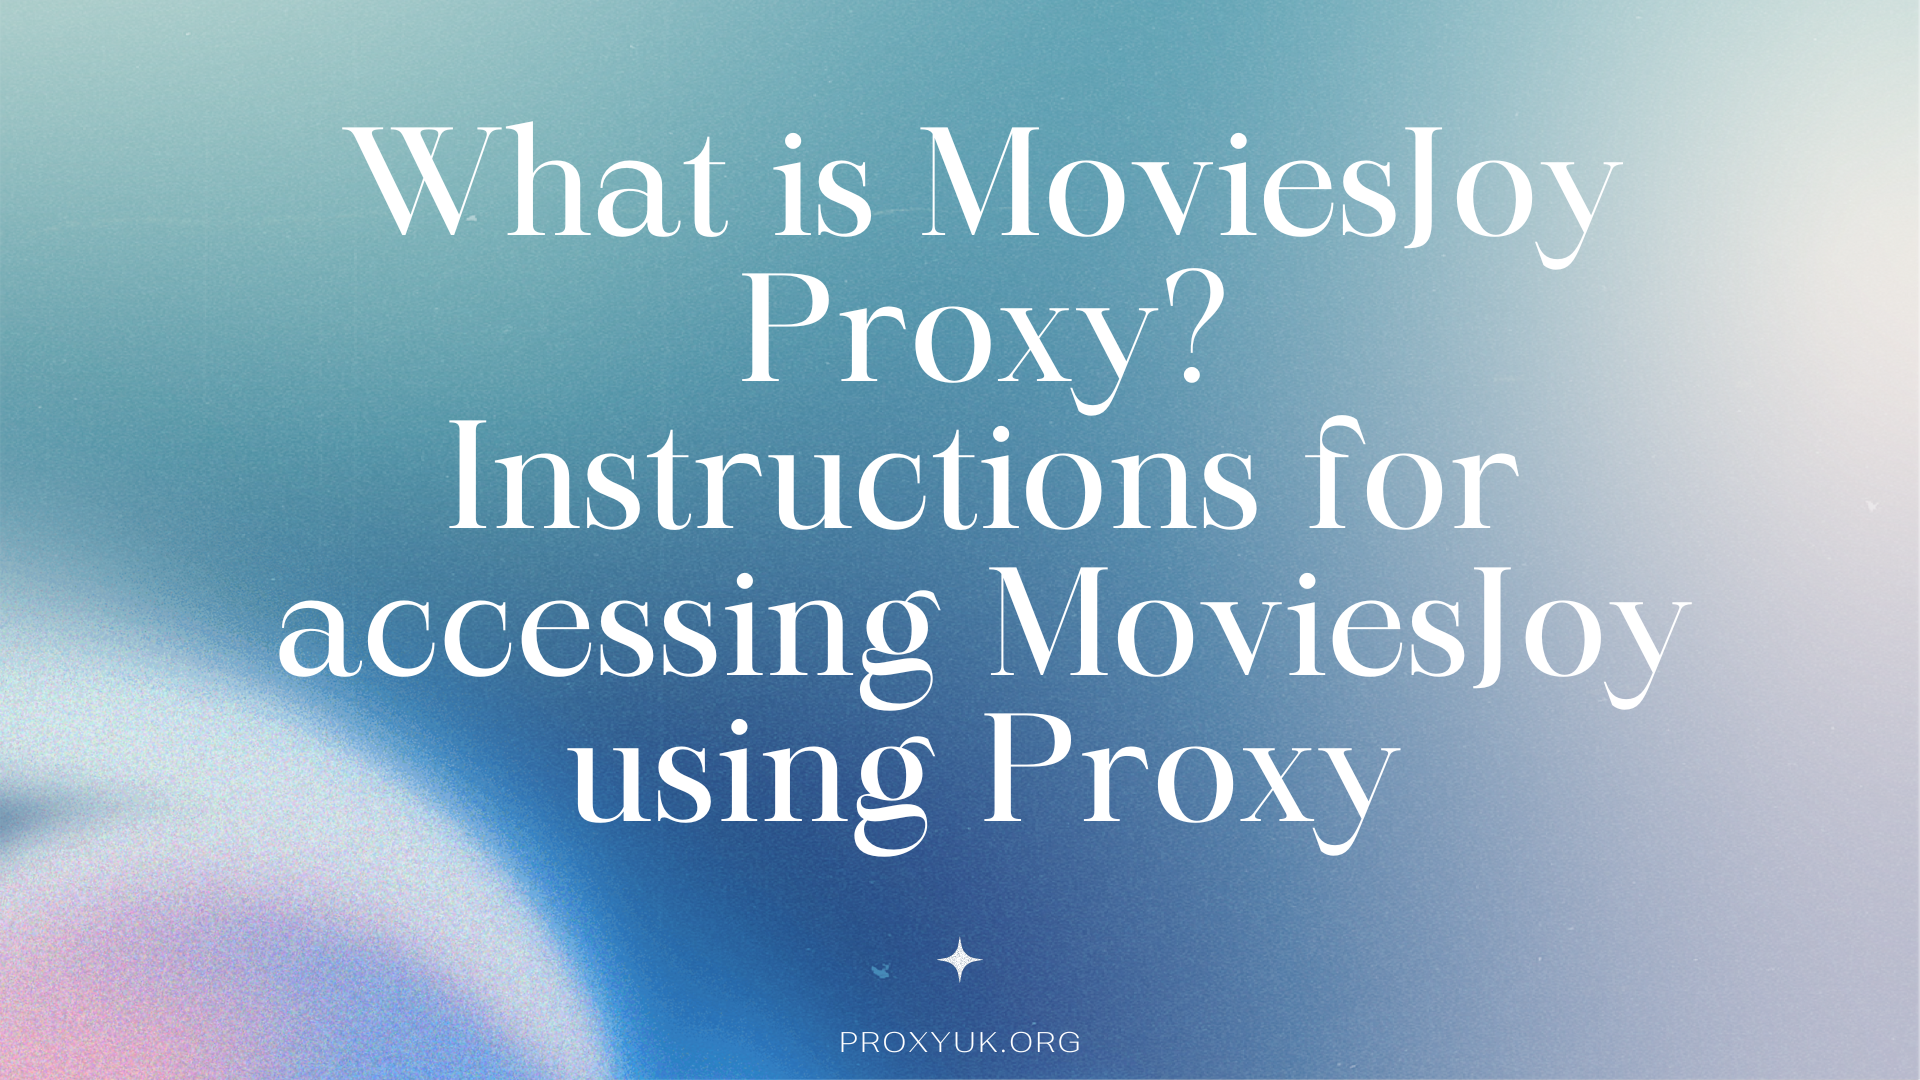 What is Moviesjoy Proxy? Instructions for accessing Moviesjoy using Proxy